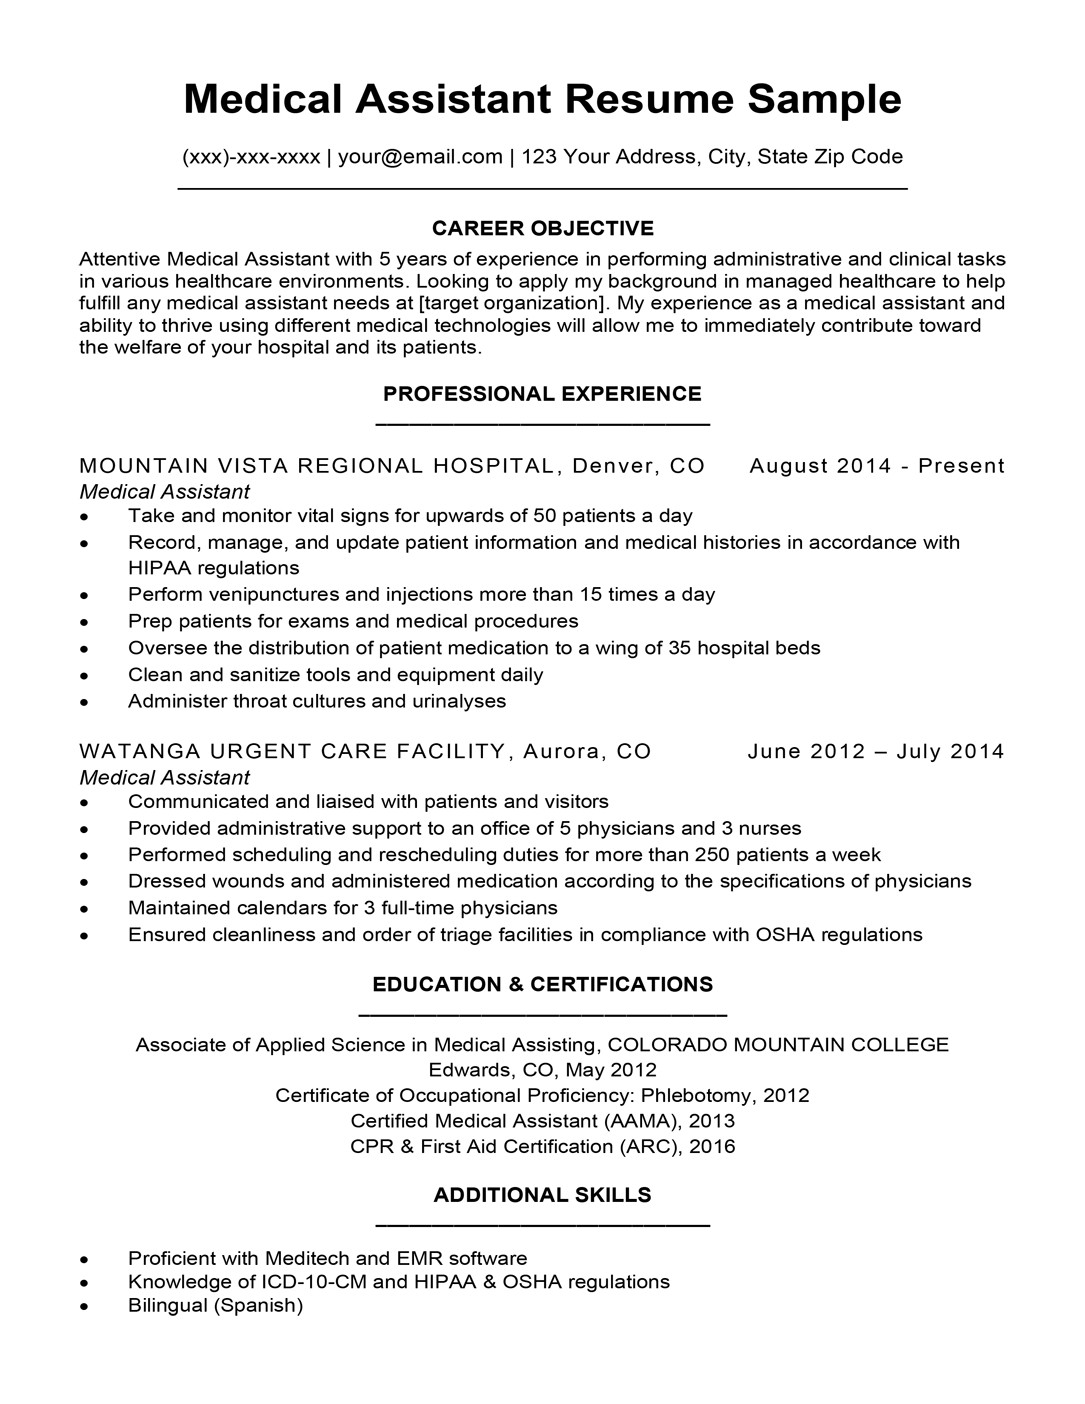 Sample Resume for Medical assistant with Experience Medical assistant Resume Sample